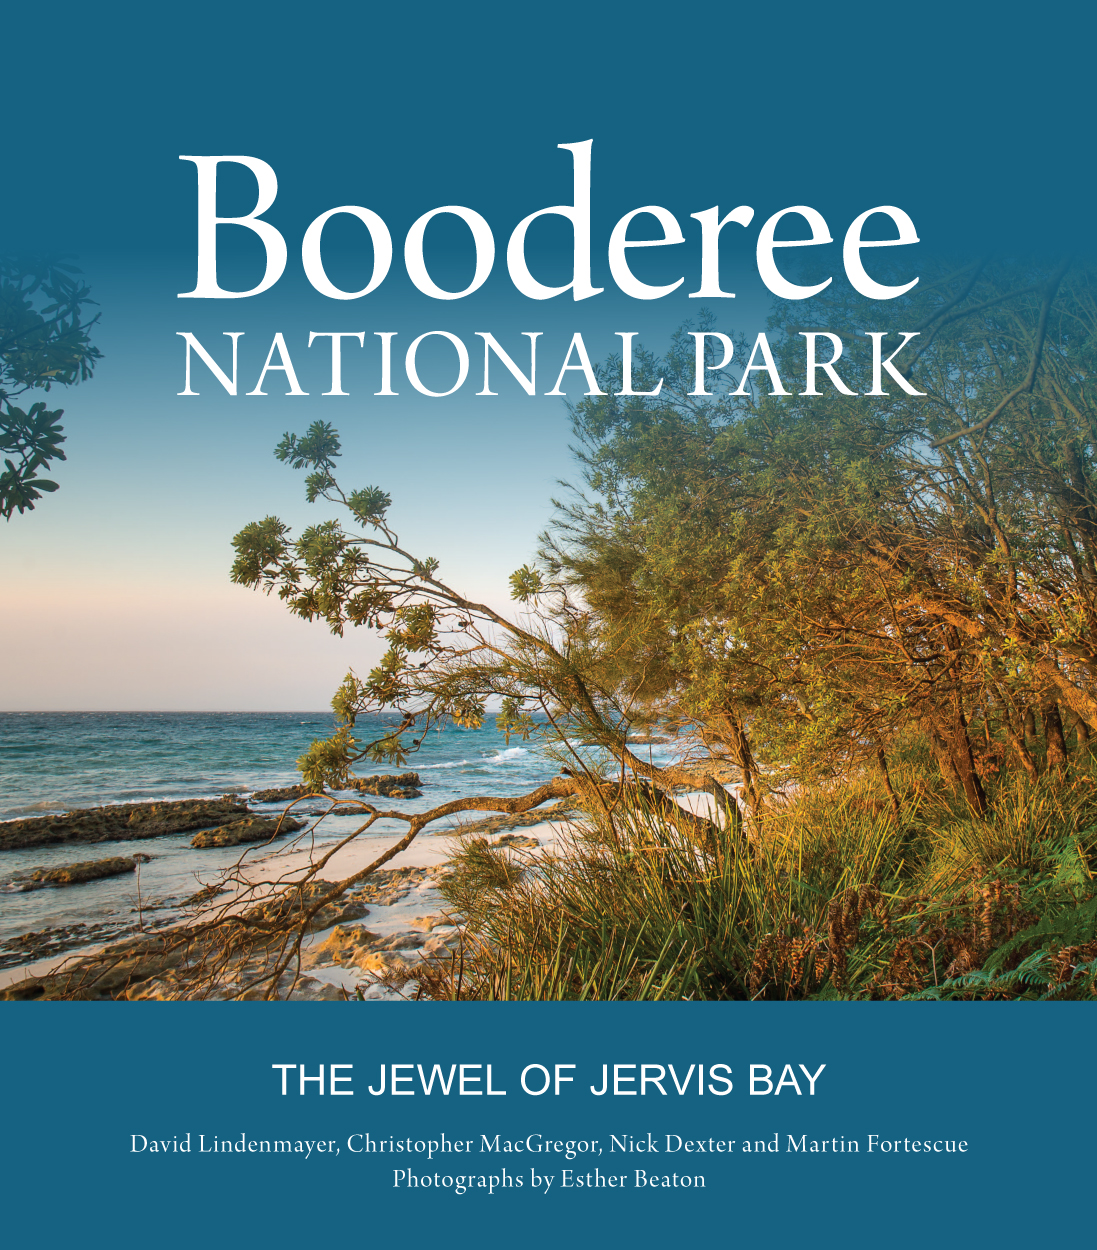 Cover image featuring a photograph of green and gold trees with a background of ocean and blue sky.